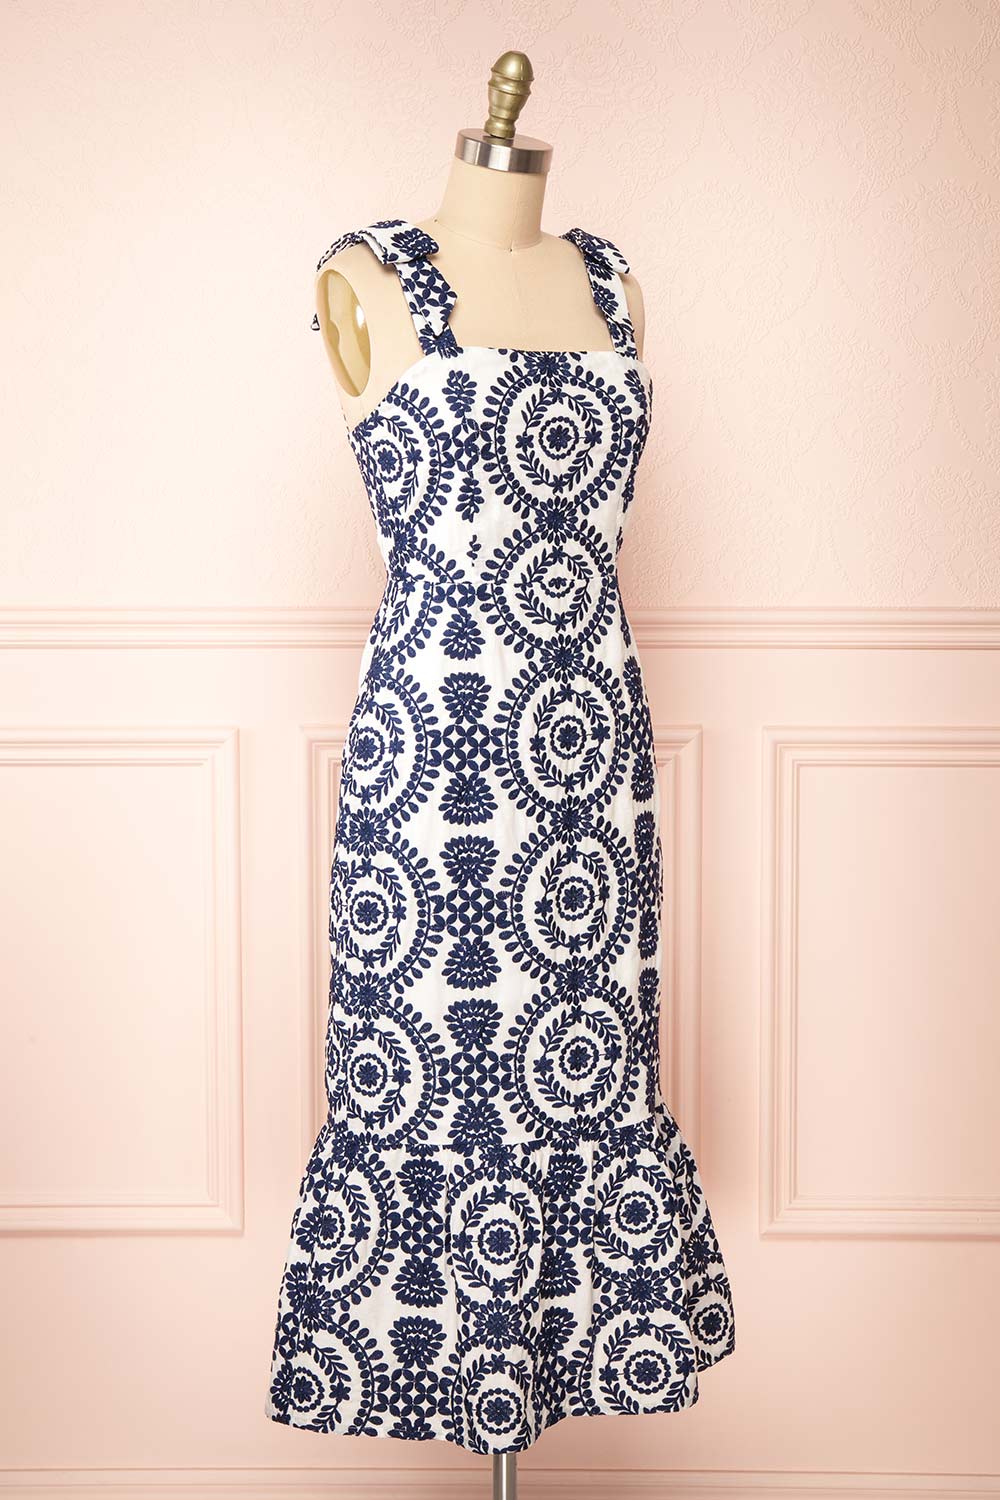 Gisa White Midi Dress w/ Navy Floral Embroidery | Boutique 1861 side view